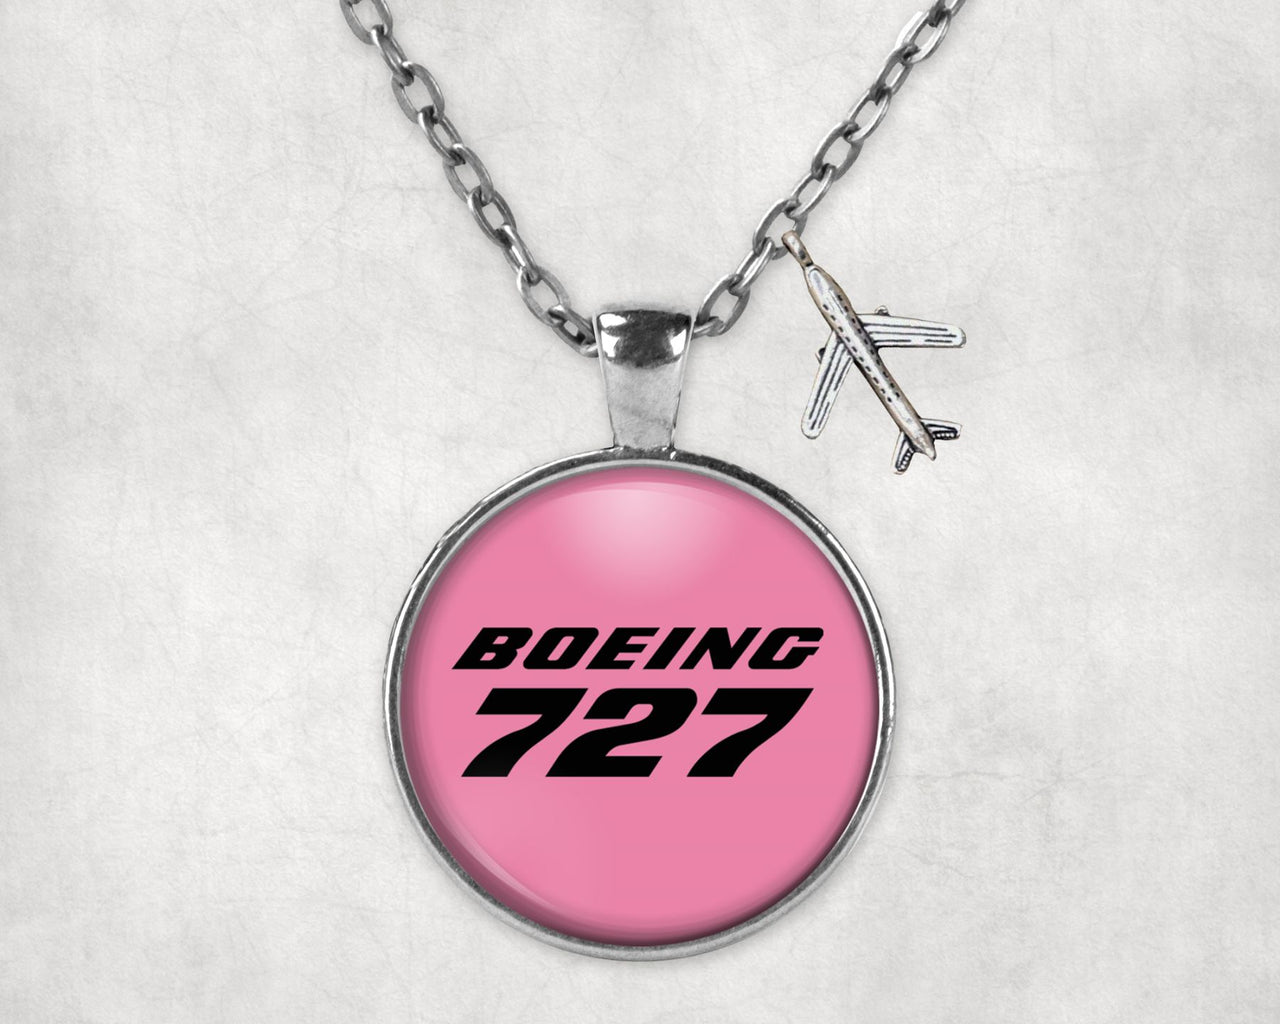 Boeing 727 & Text Designed Necklaces